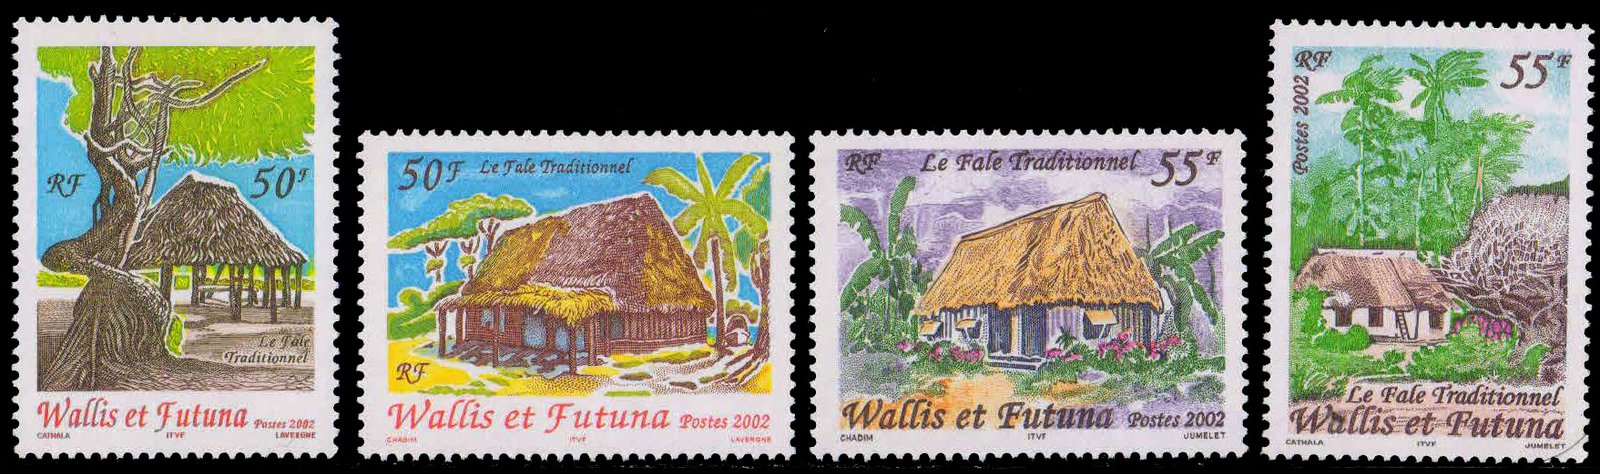 WALLIS & FUTUNA ISLANDS 2002-Traditional Thatched House, Set of 4, MNH, S.G. 800-03-Cat � 7.50